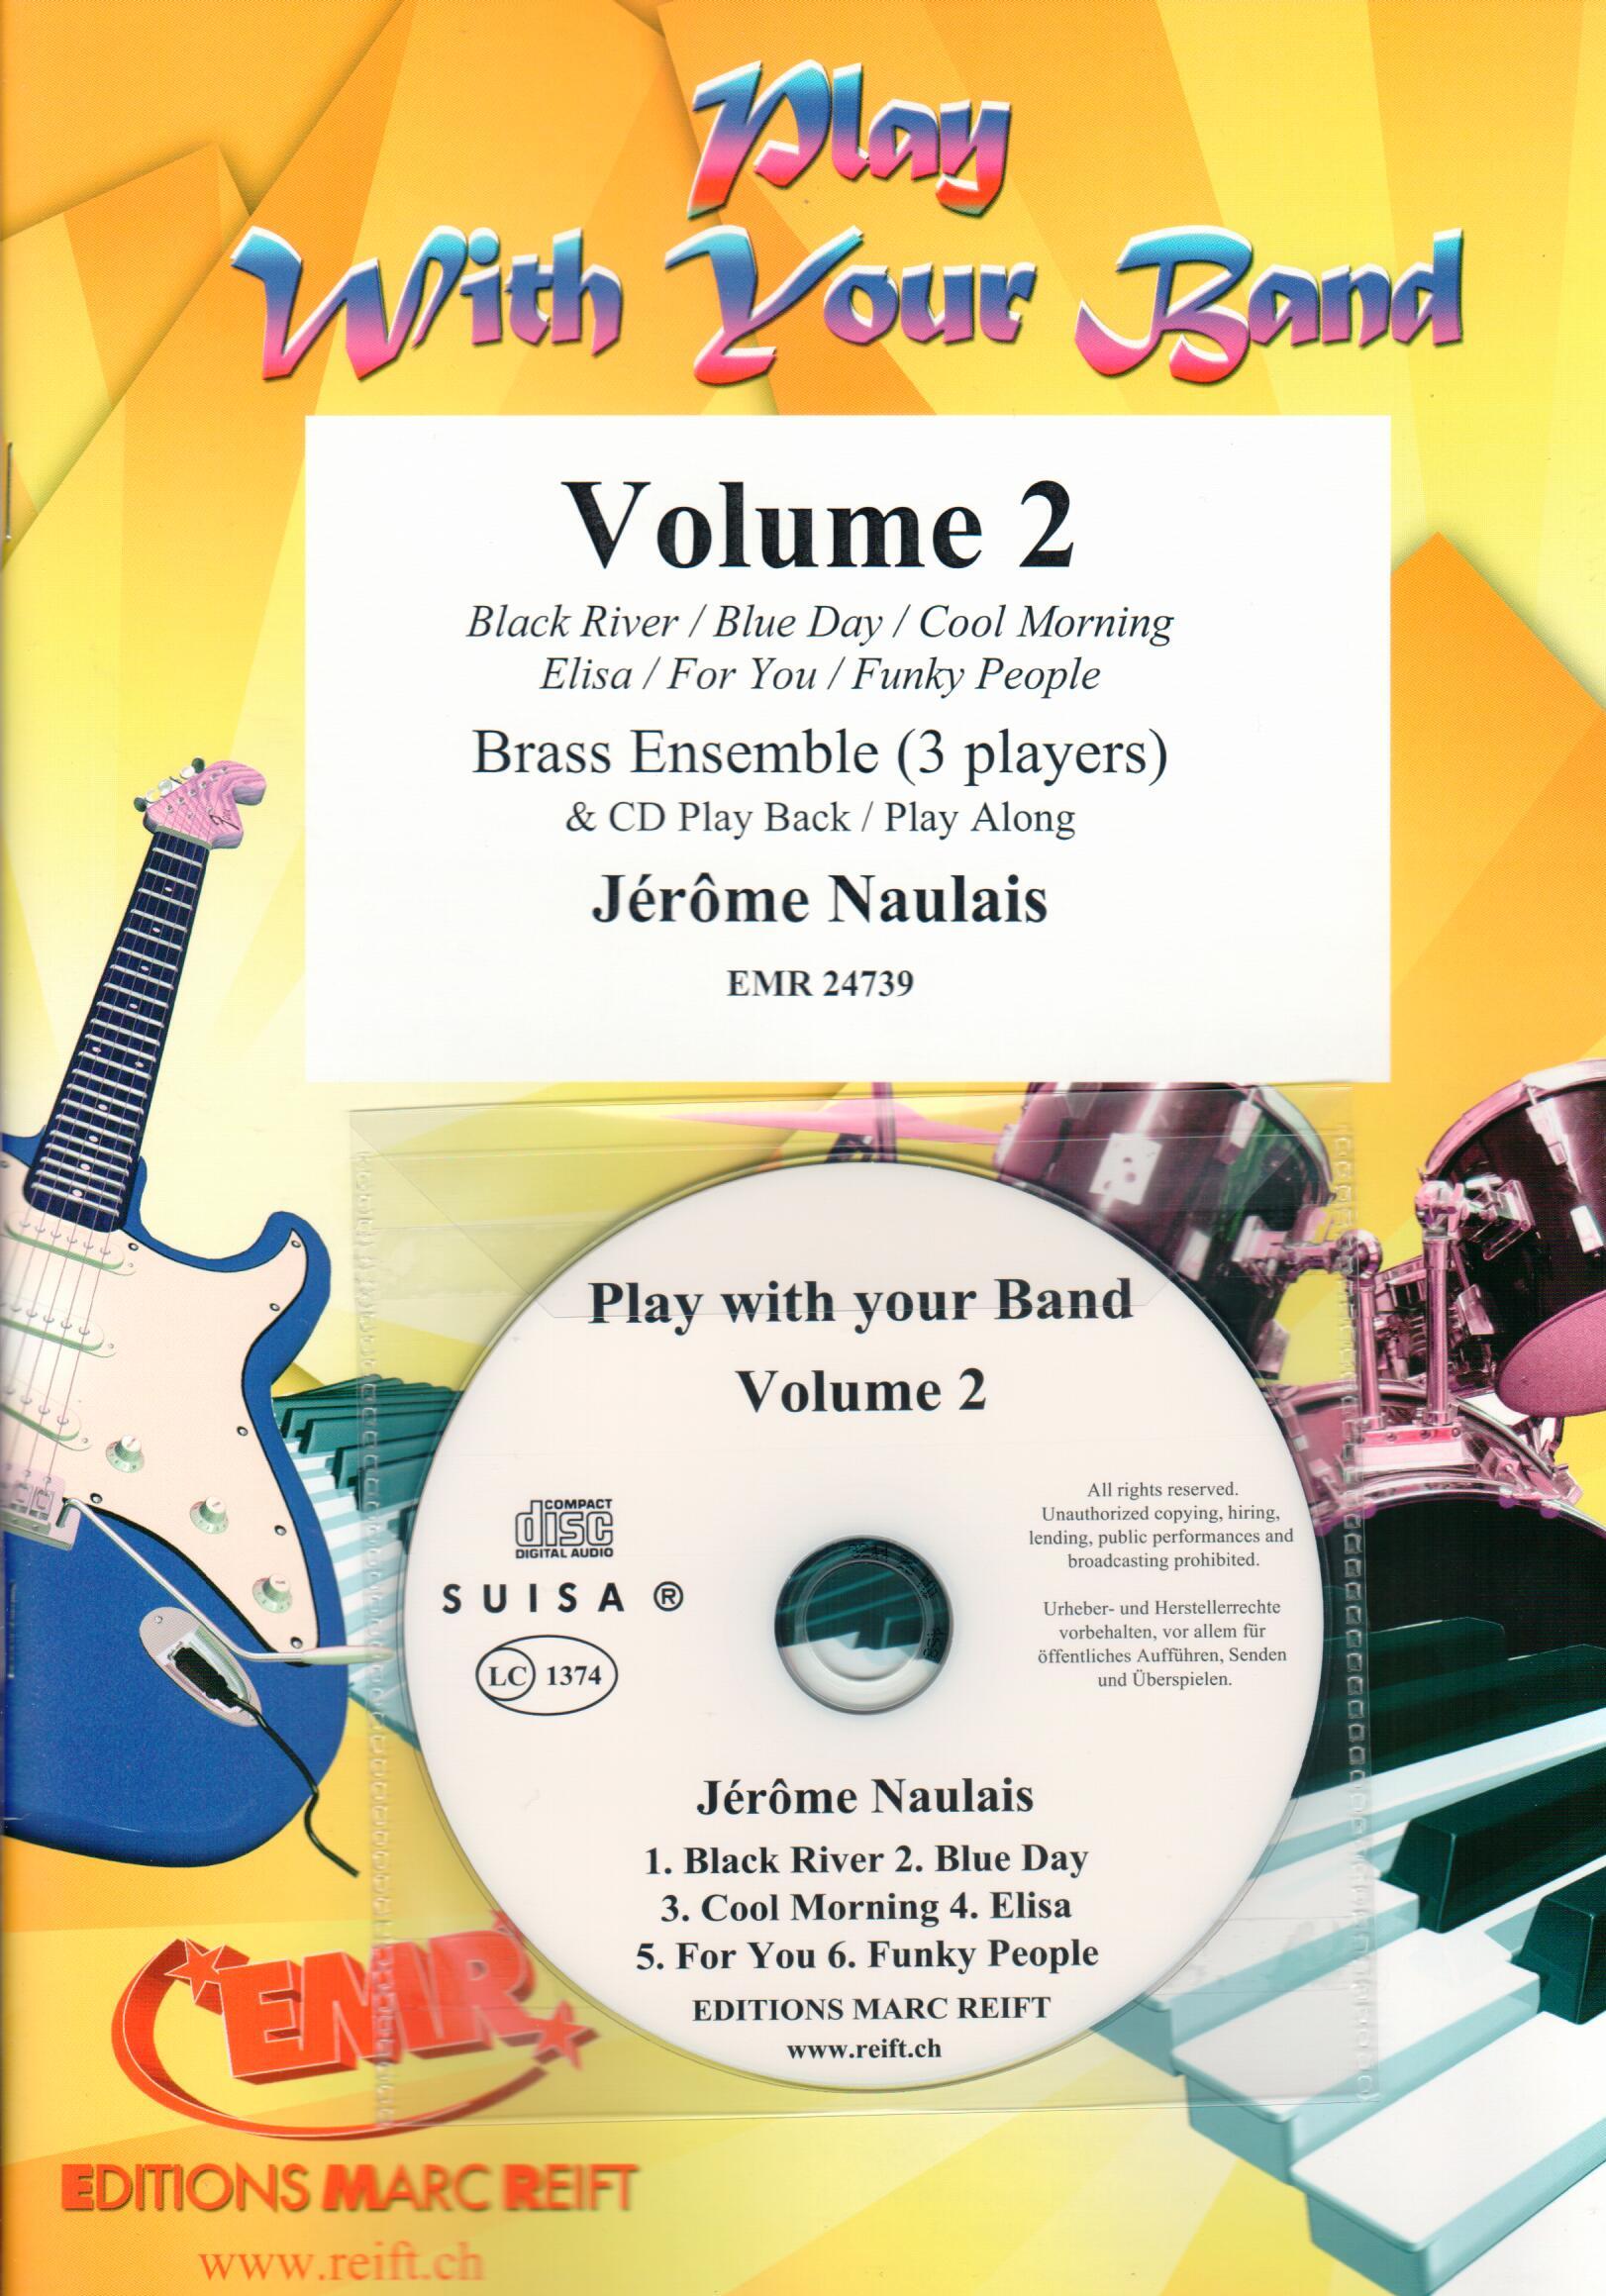 PLAY WITH YOUR BAND VOLUME 2, Trios